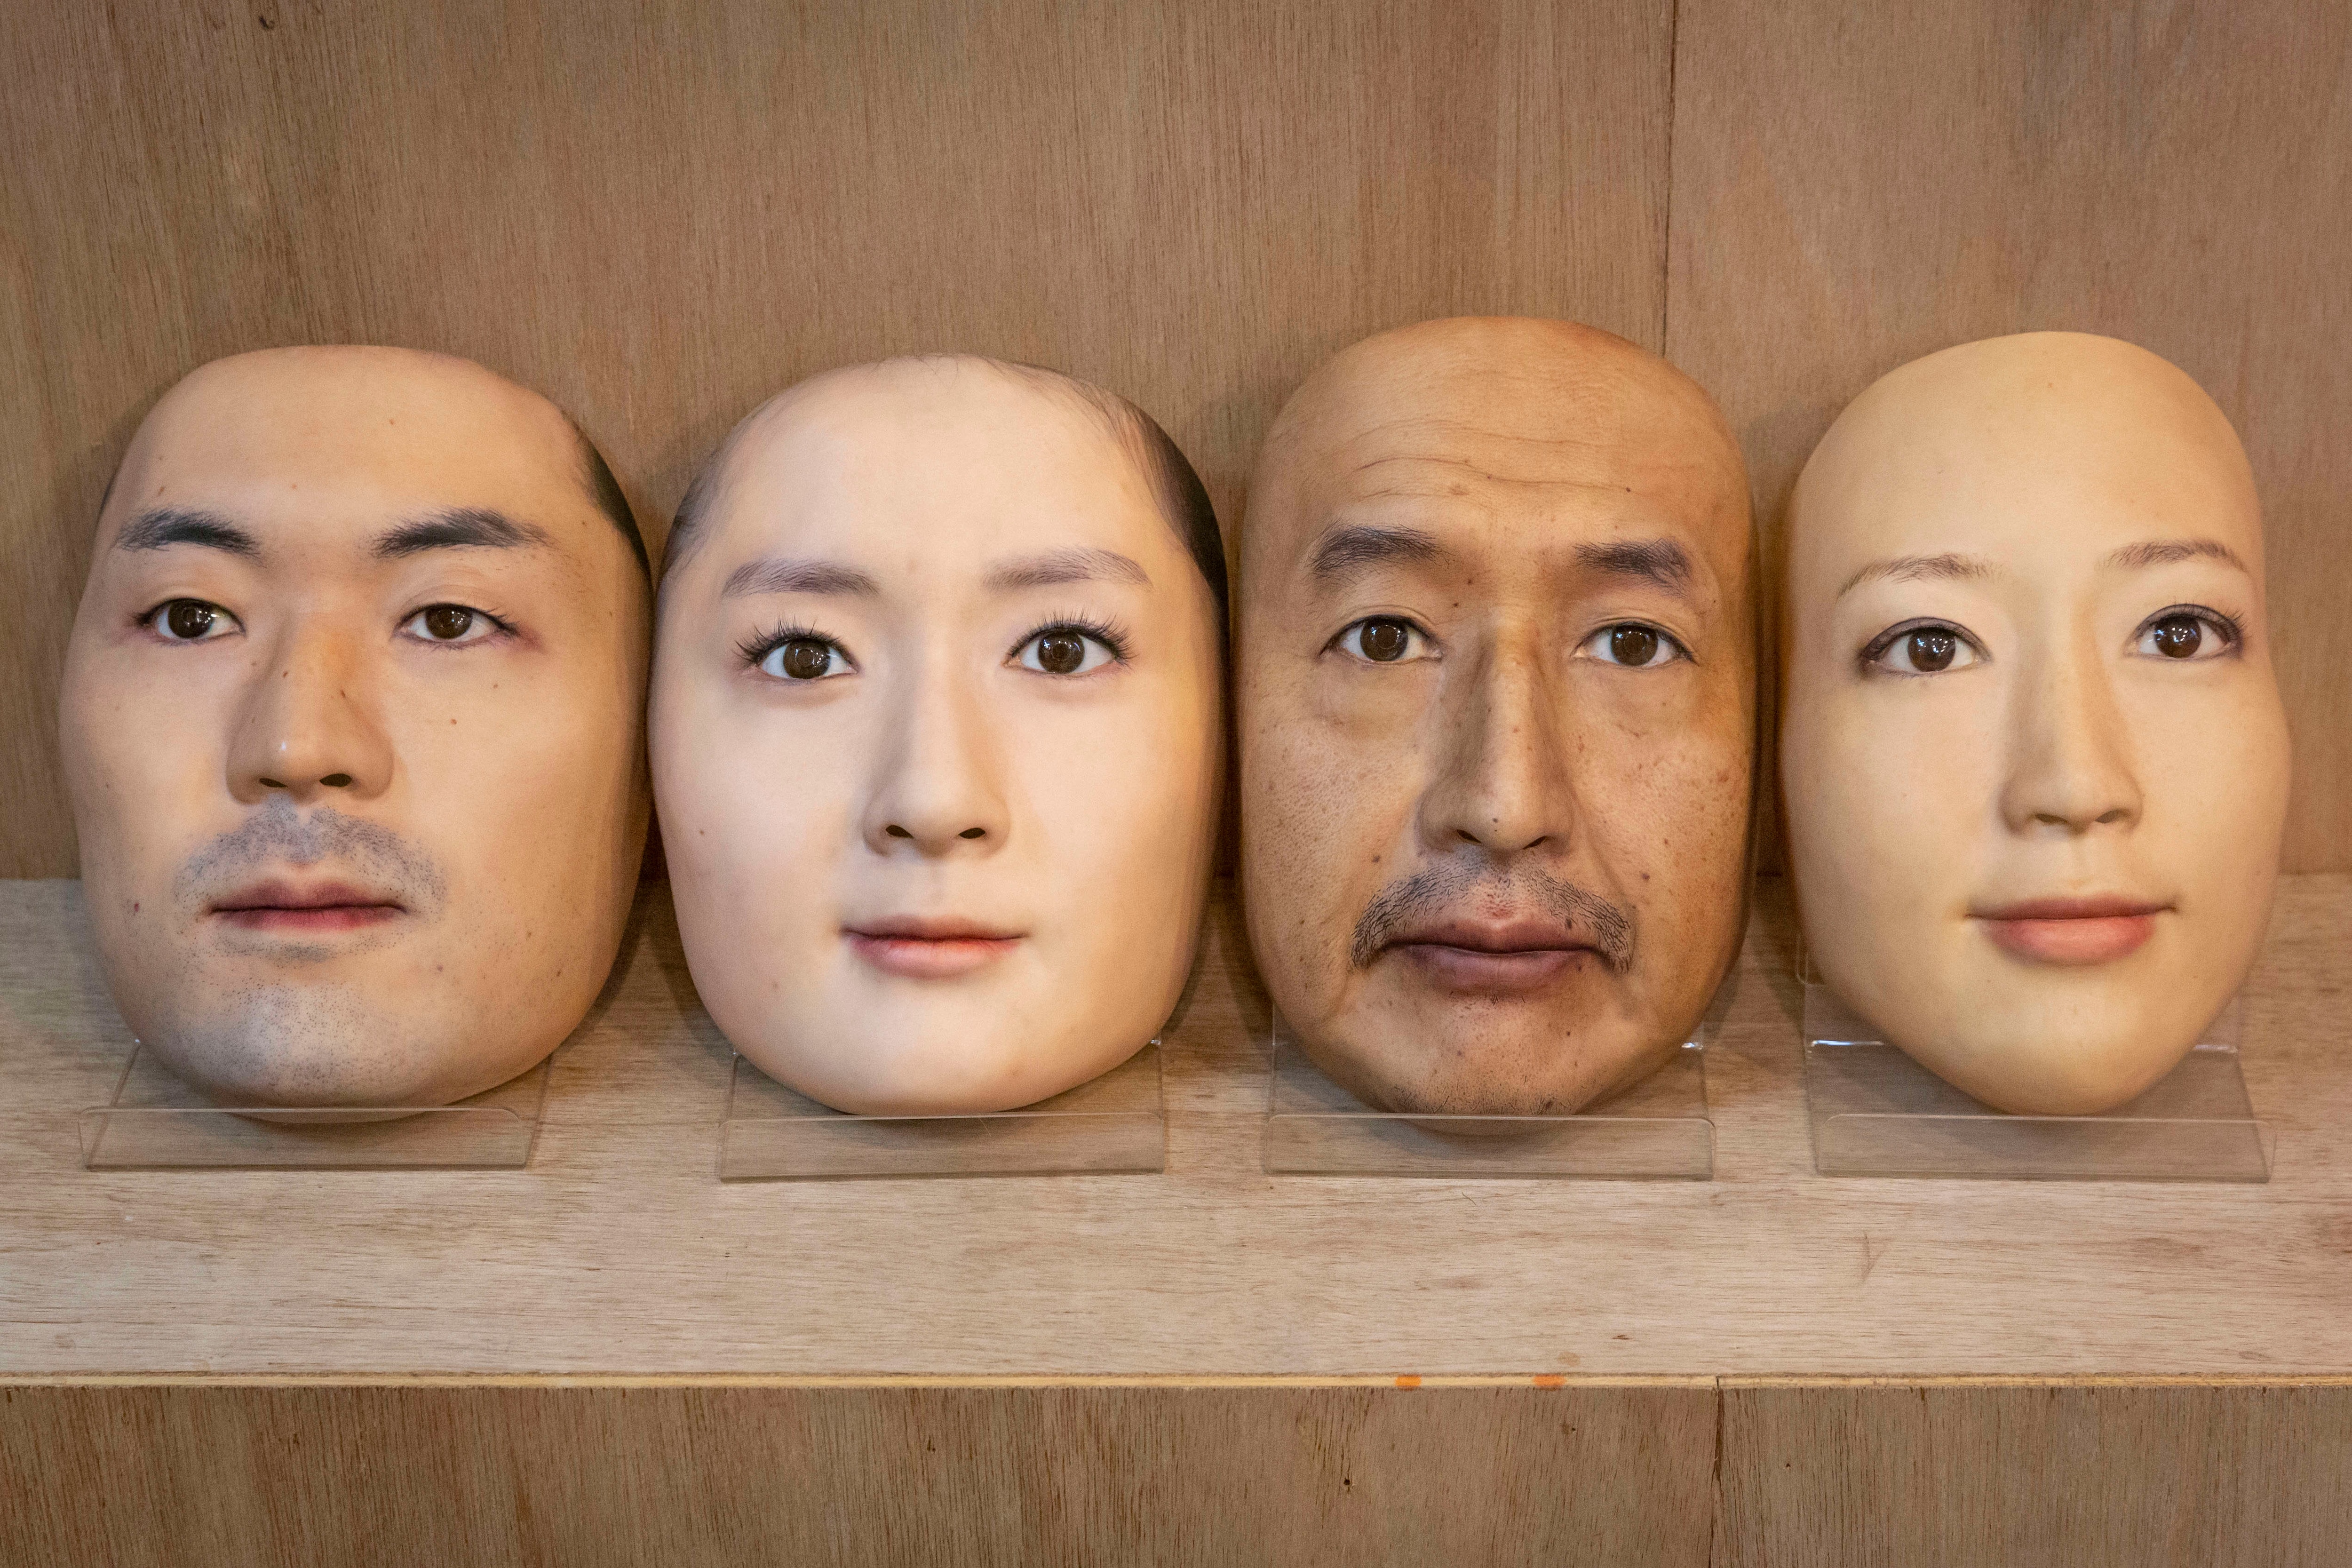 printed from Shuhei Okawara are realistic face clones | SYFY WIRE